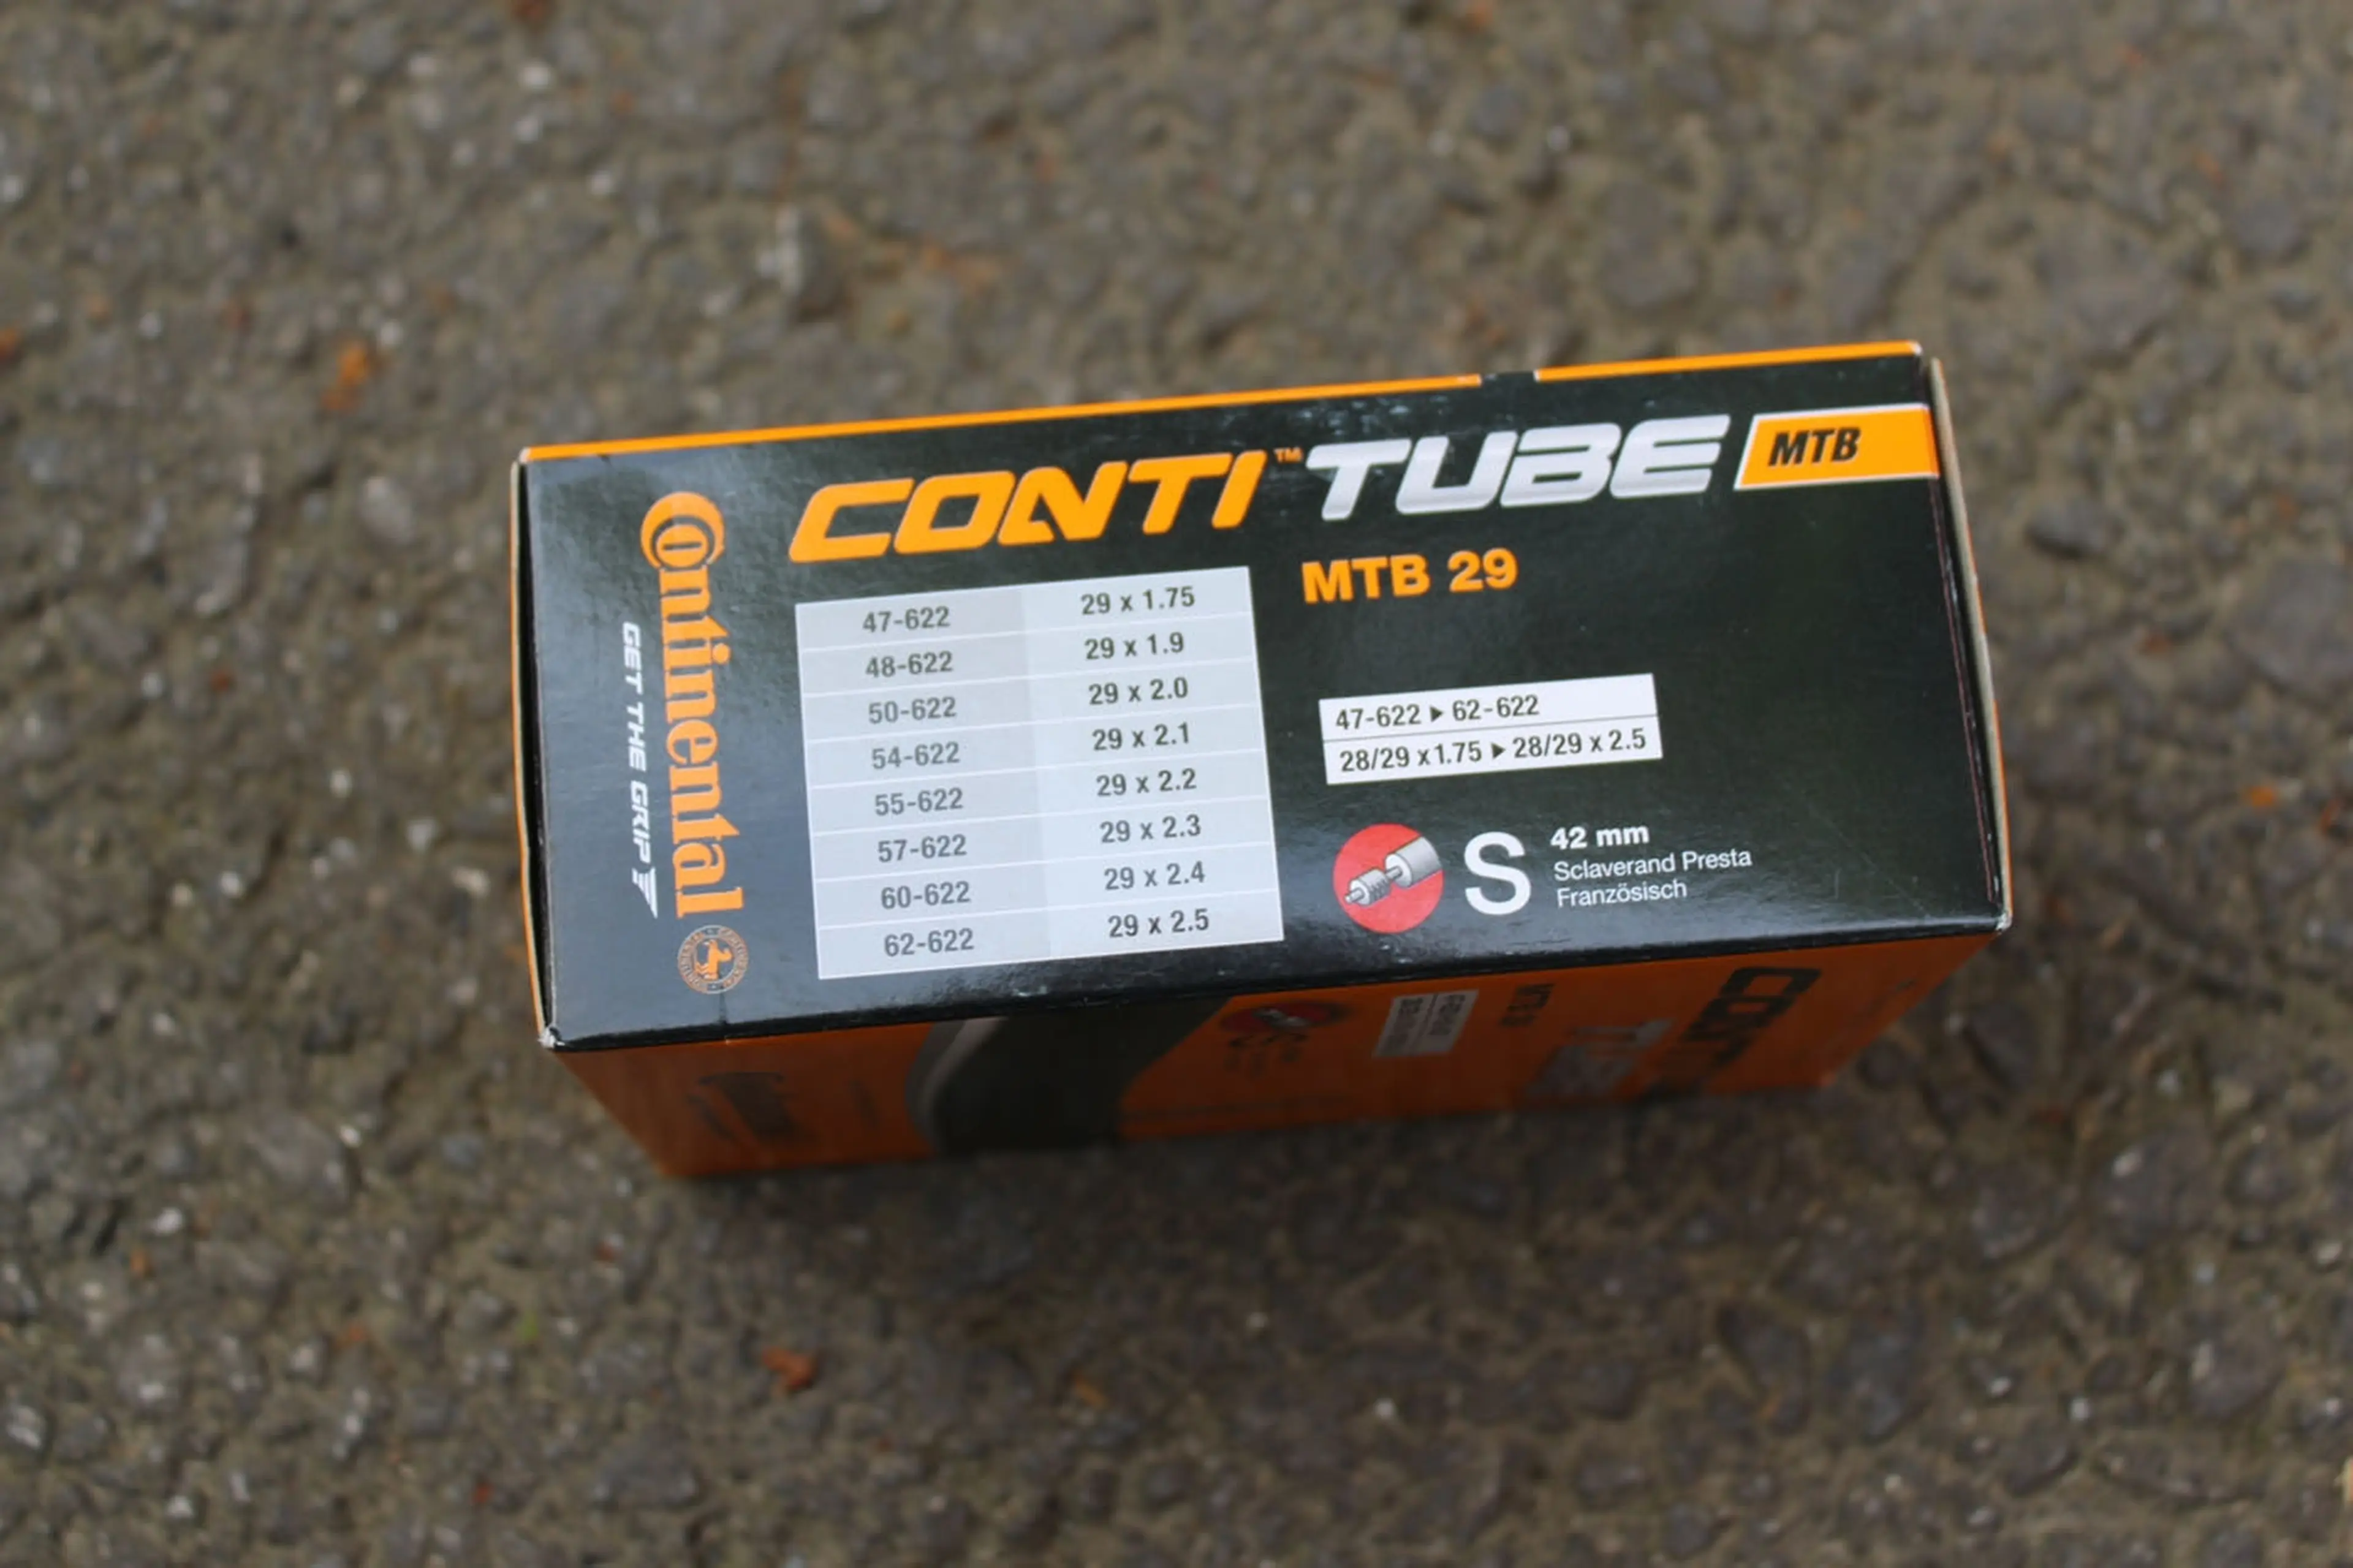 Image Continental Wide Tube 29x1.75-2.50 FV.